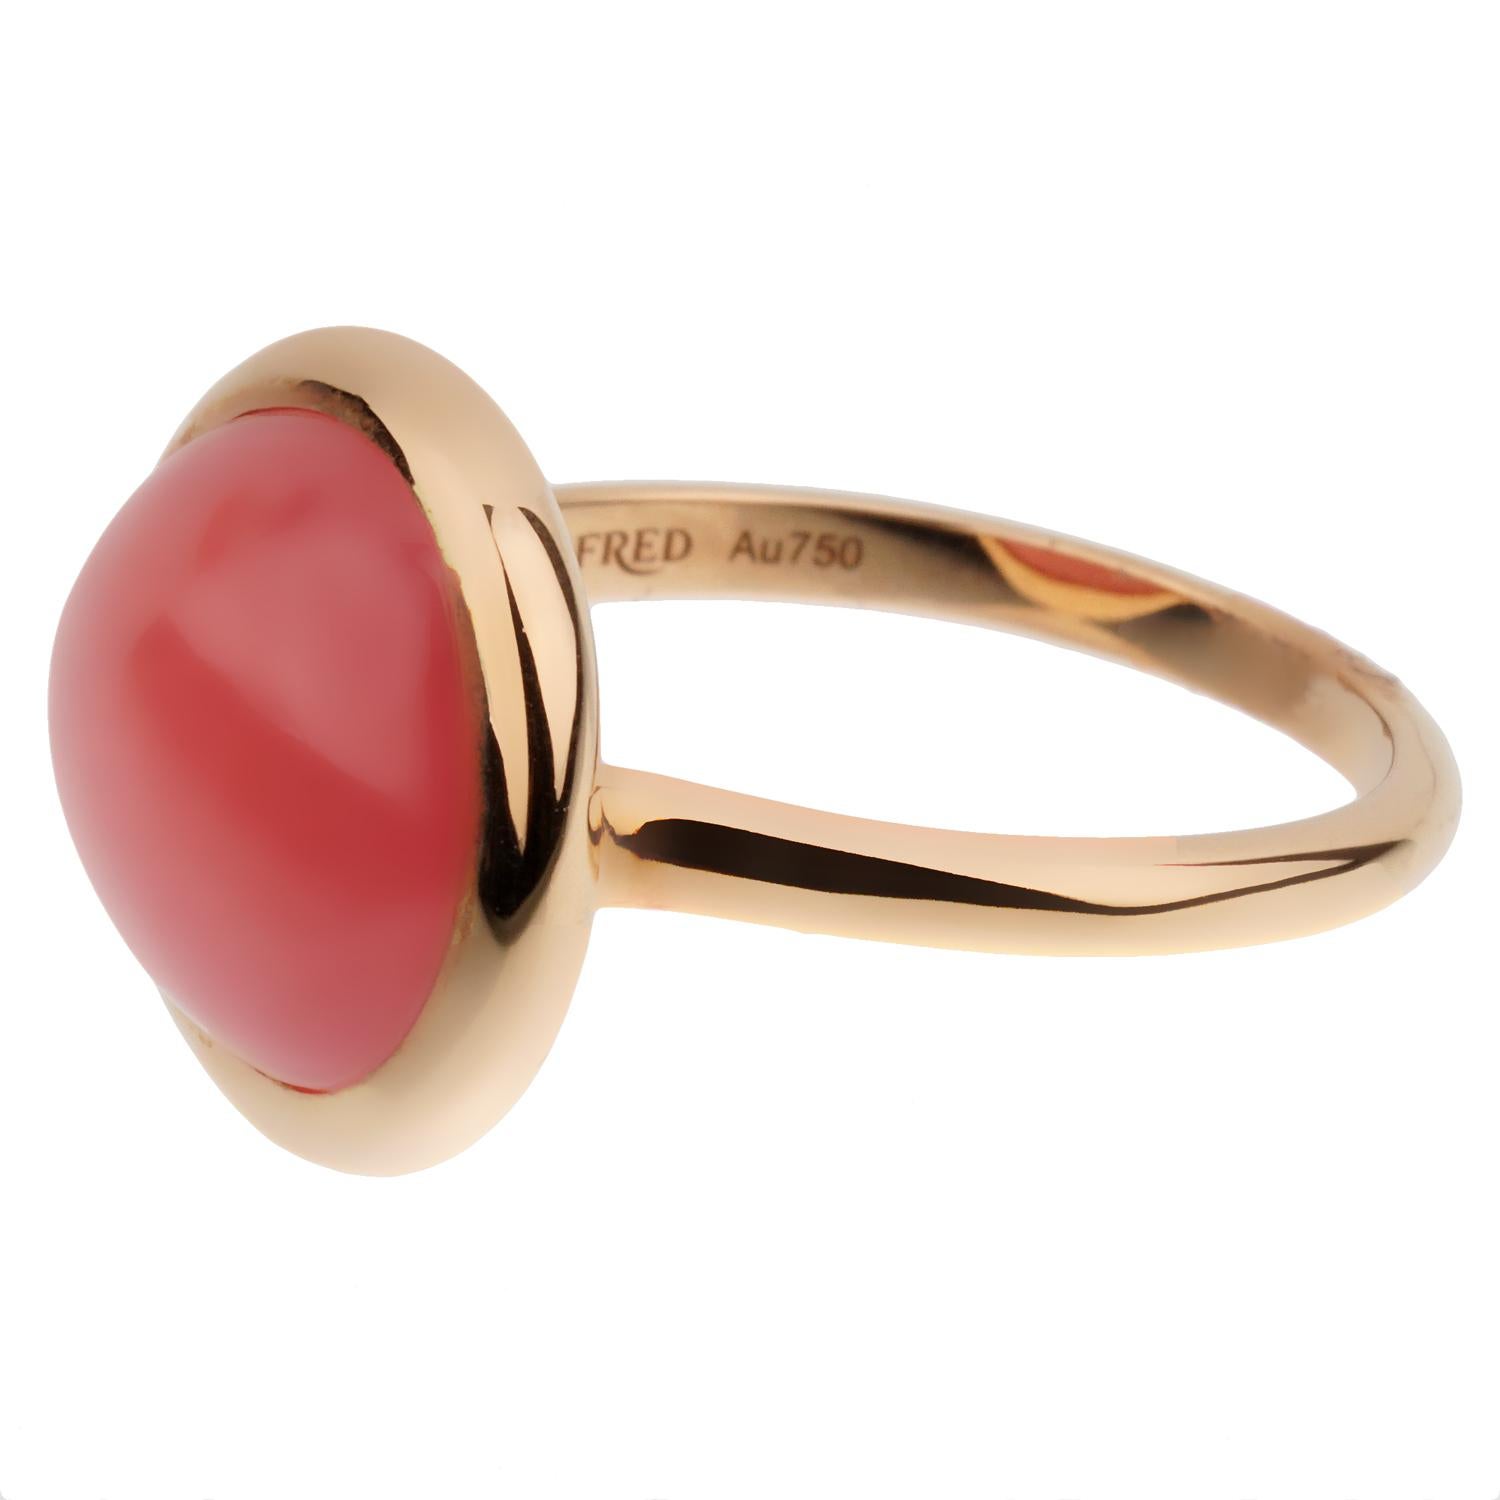 A chic Fred of Paris rose gold cocktail ring showcasing a 7ct cabochon Rhodochrosite set in 18k gold. The ring measures a size 5 3/4 and can be resized if needed.